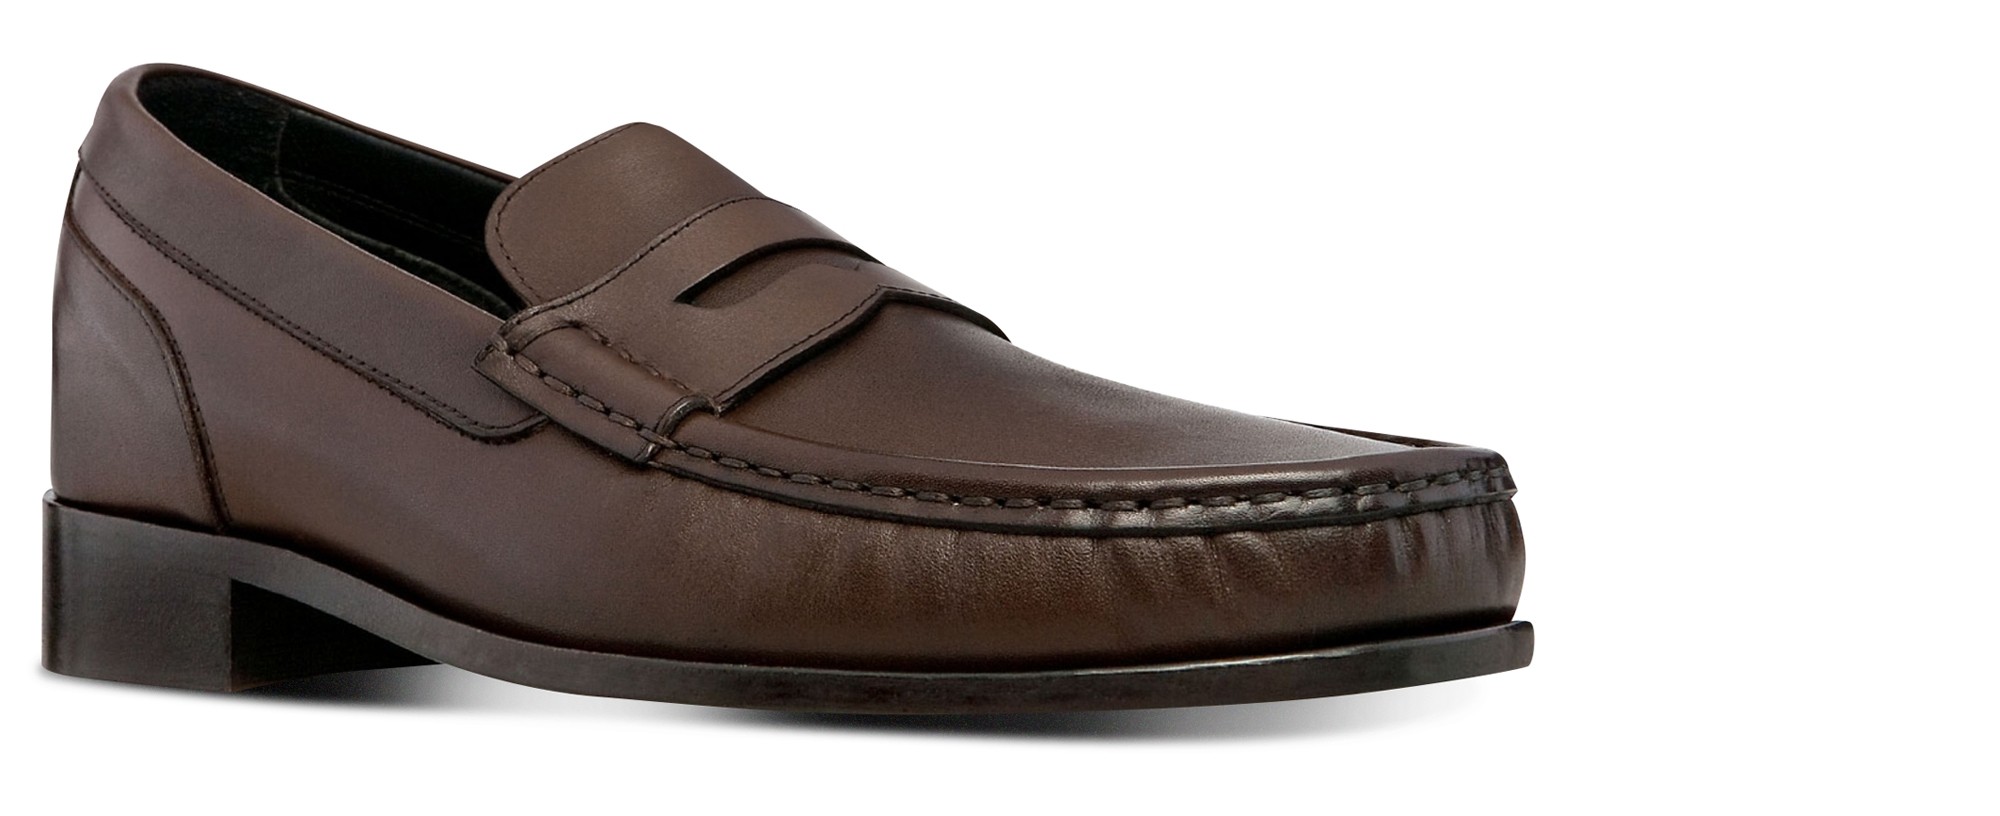 Kensington - Elevator Loafers in Full Grain Leather up to 2.6 inches